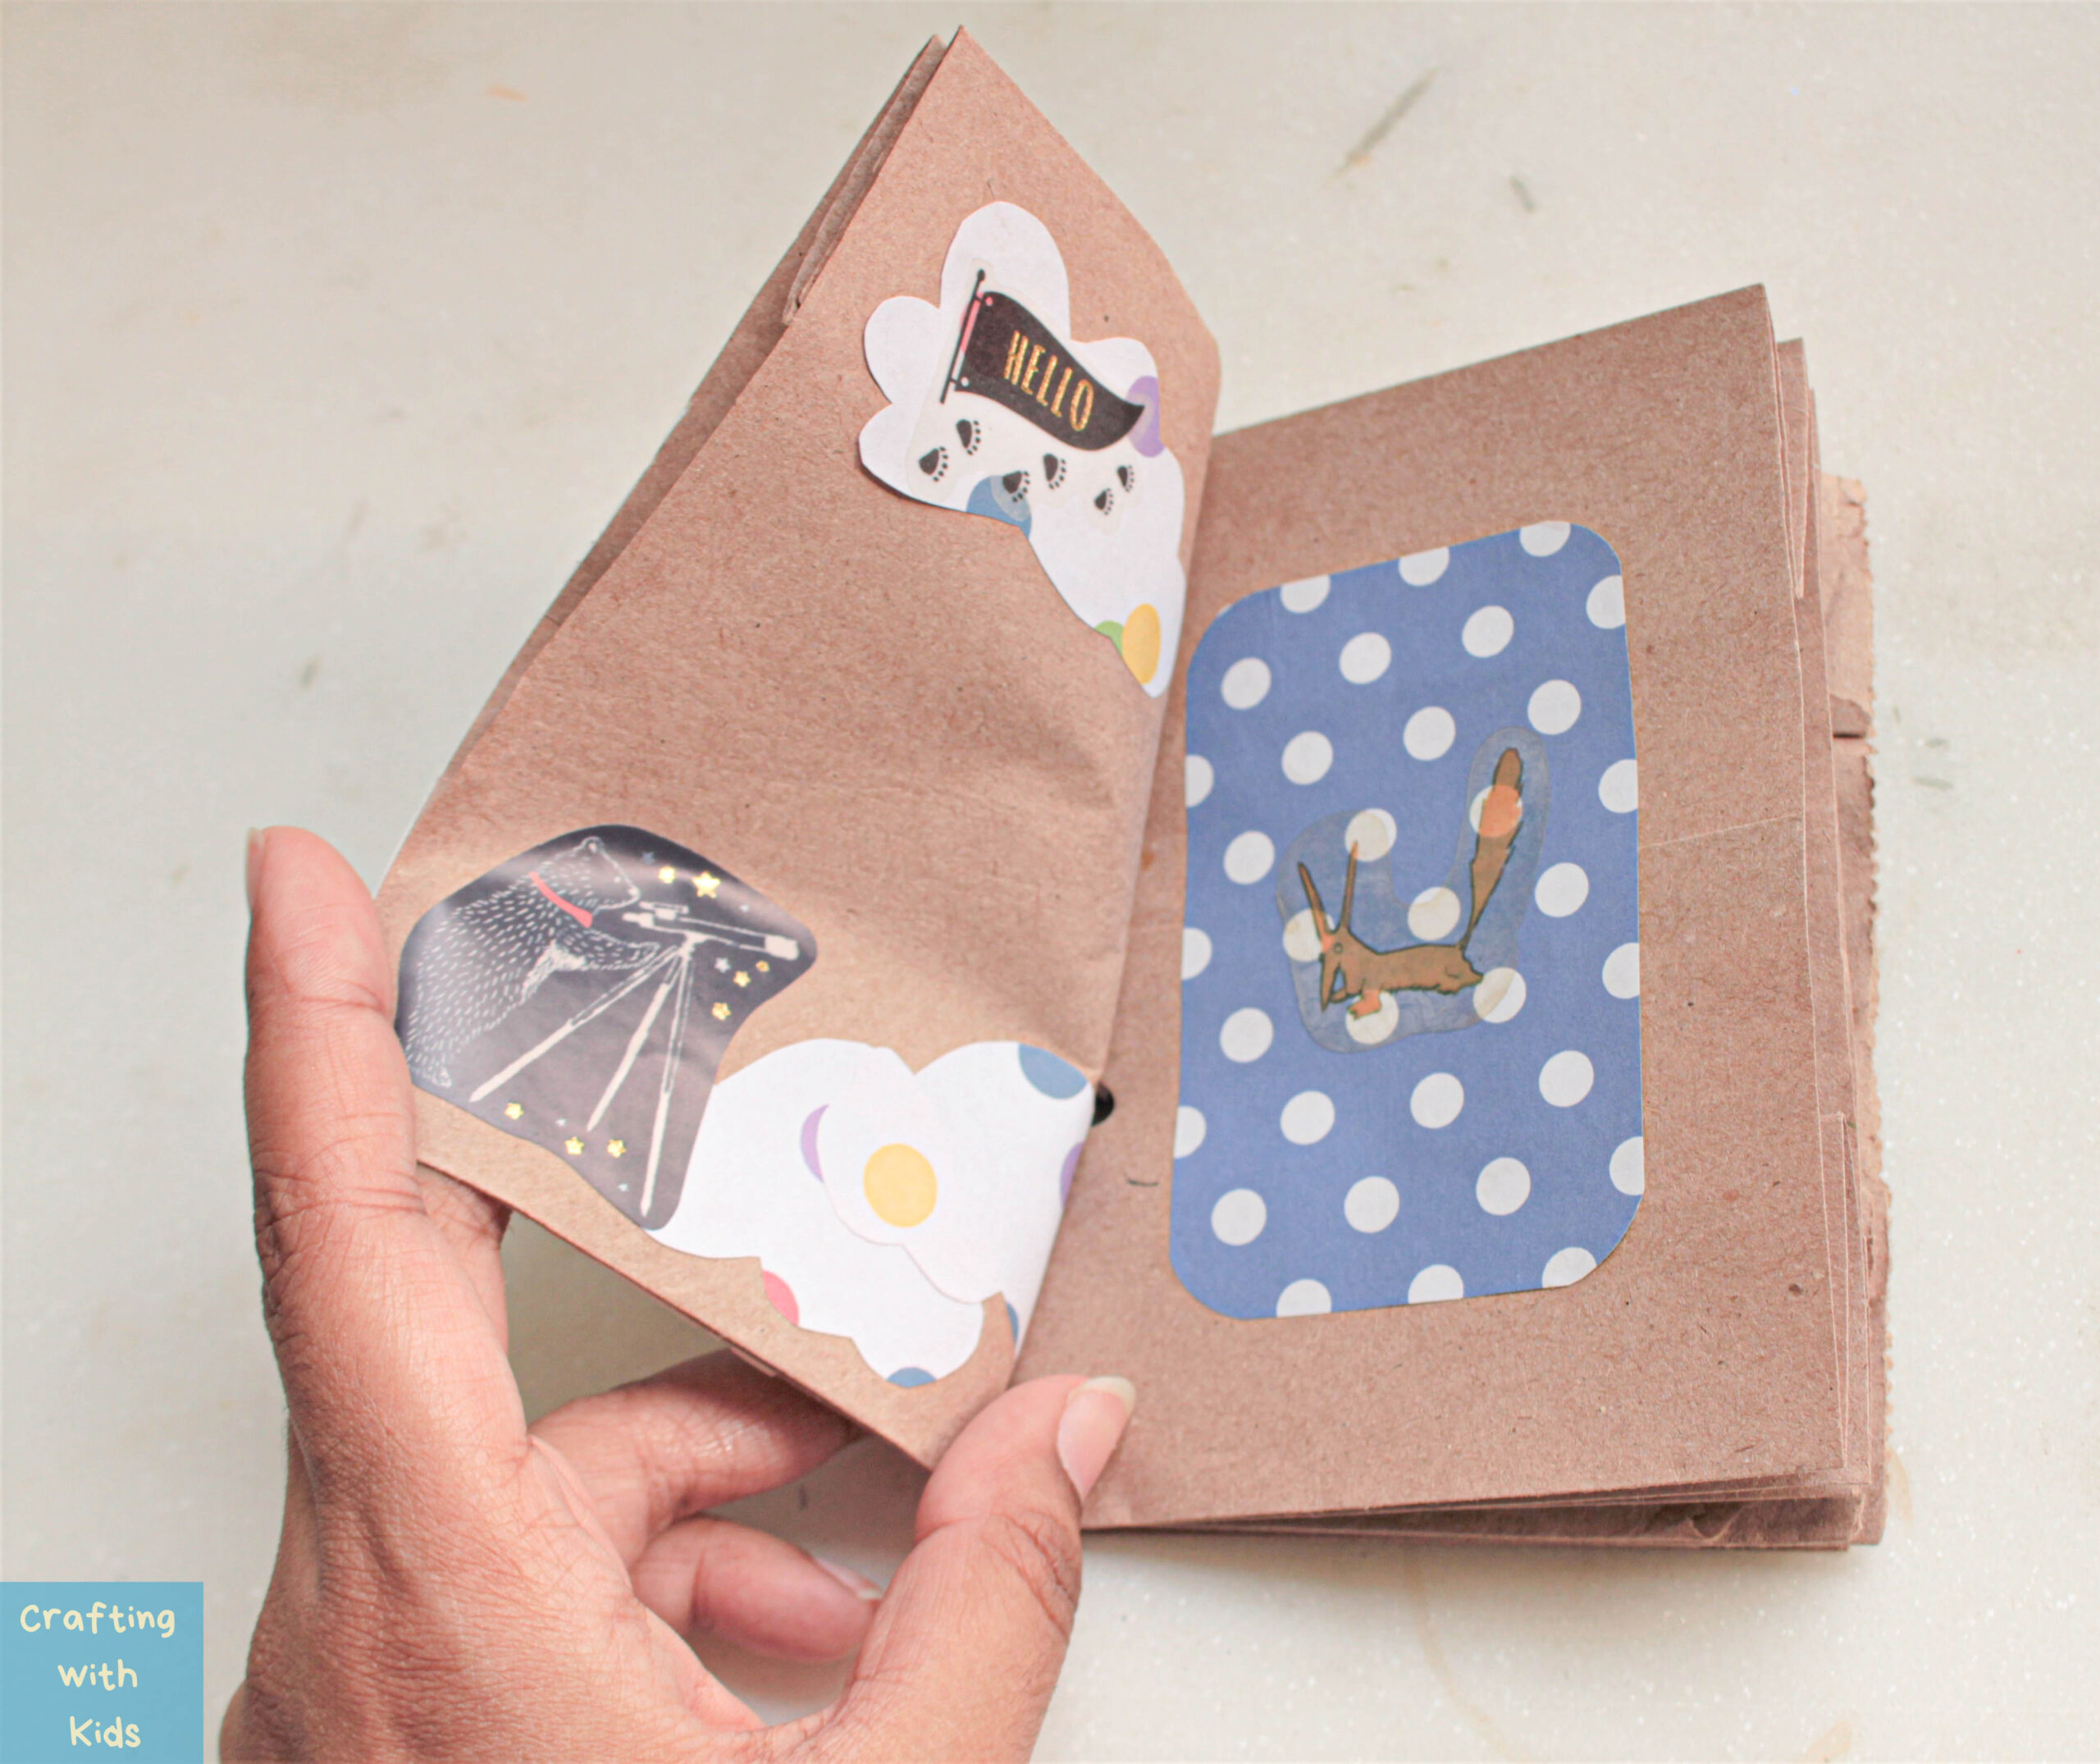 Ten Awesome Flip Book Kits for Kids